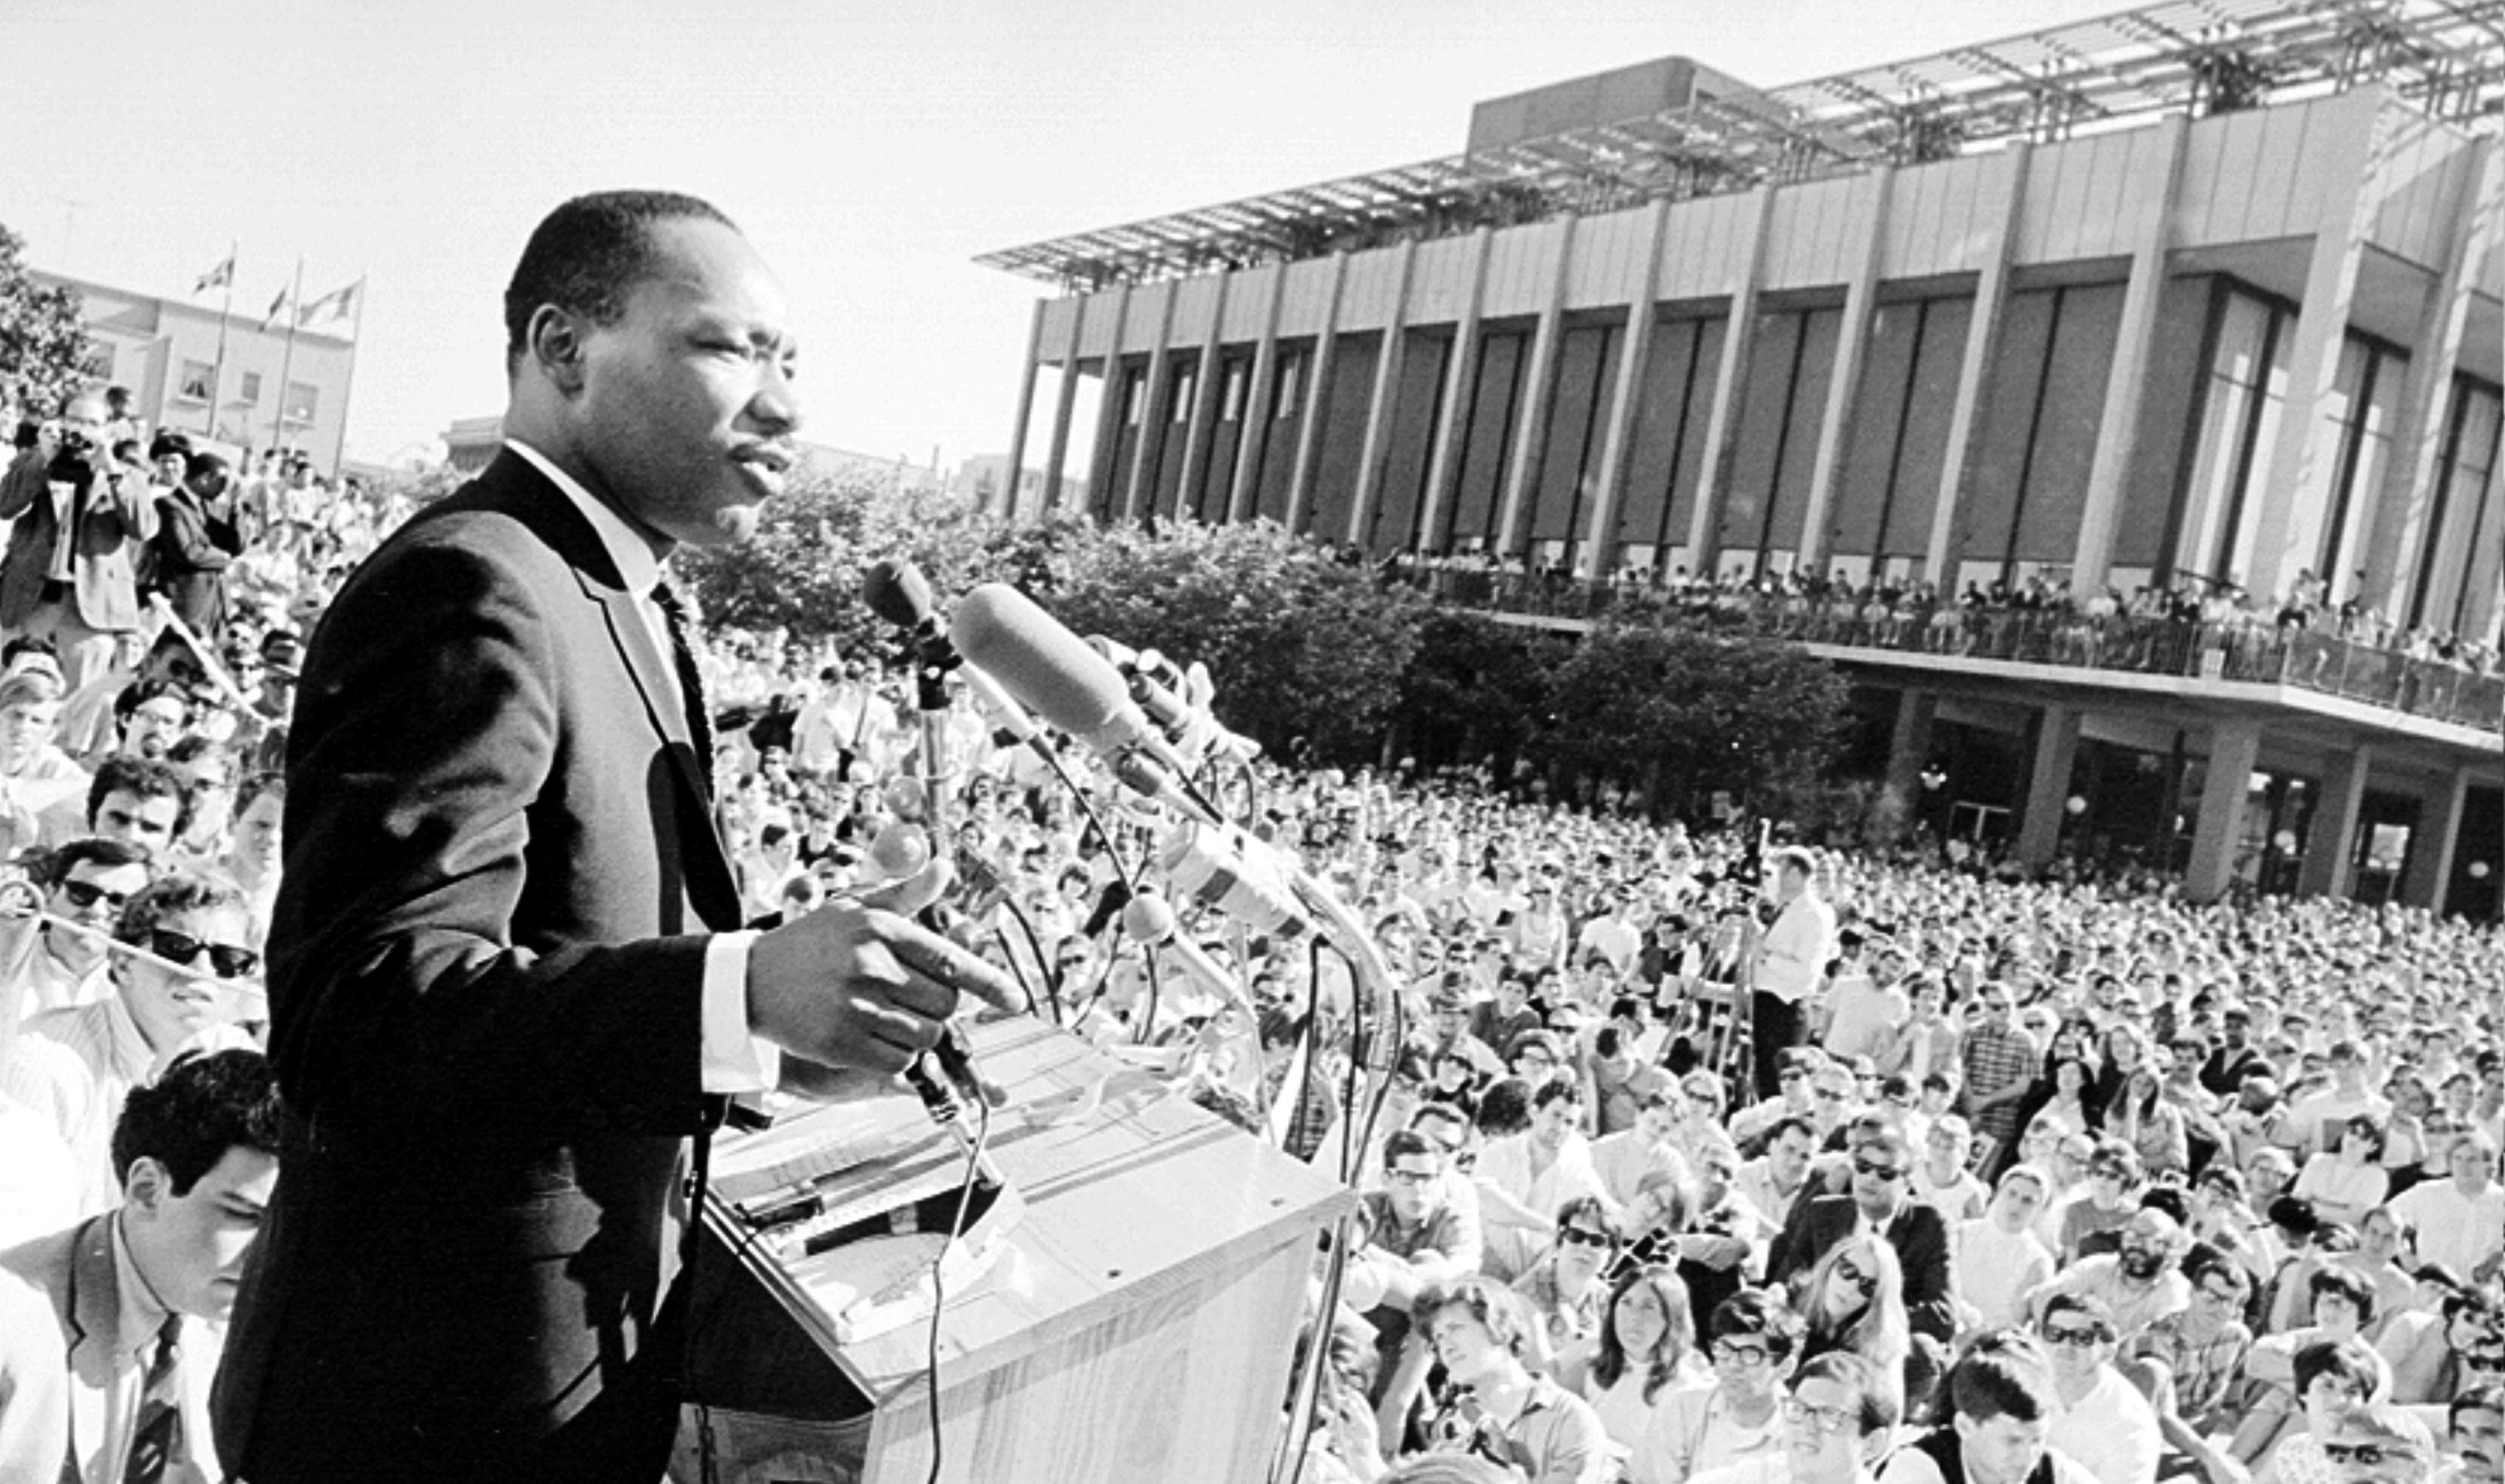 Martin Luther King, Jr. delivers a speech on May 17, 1967.